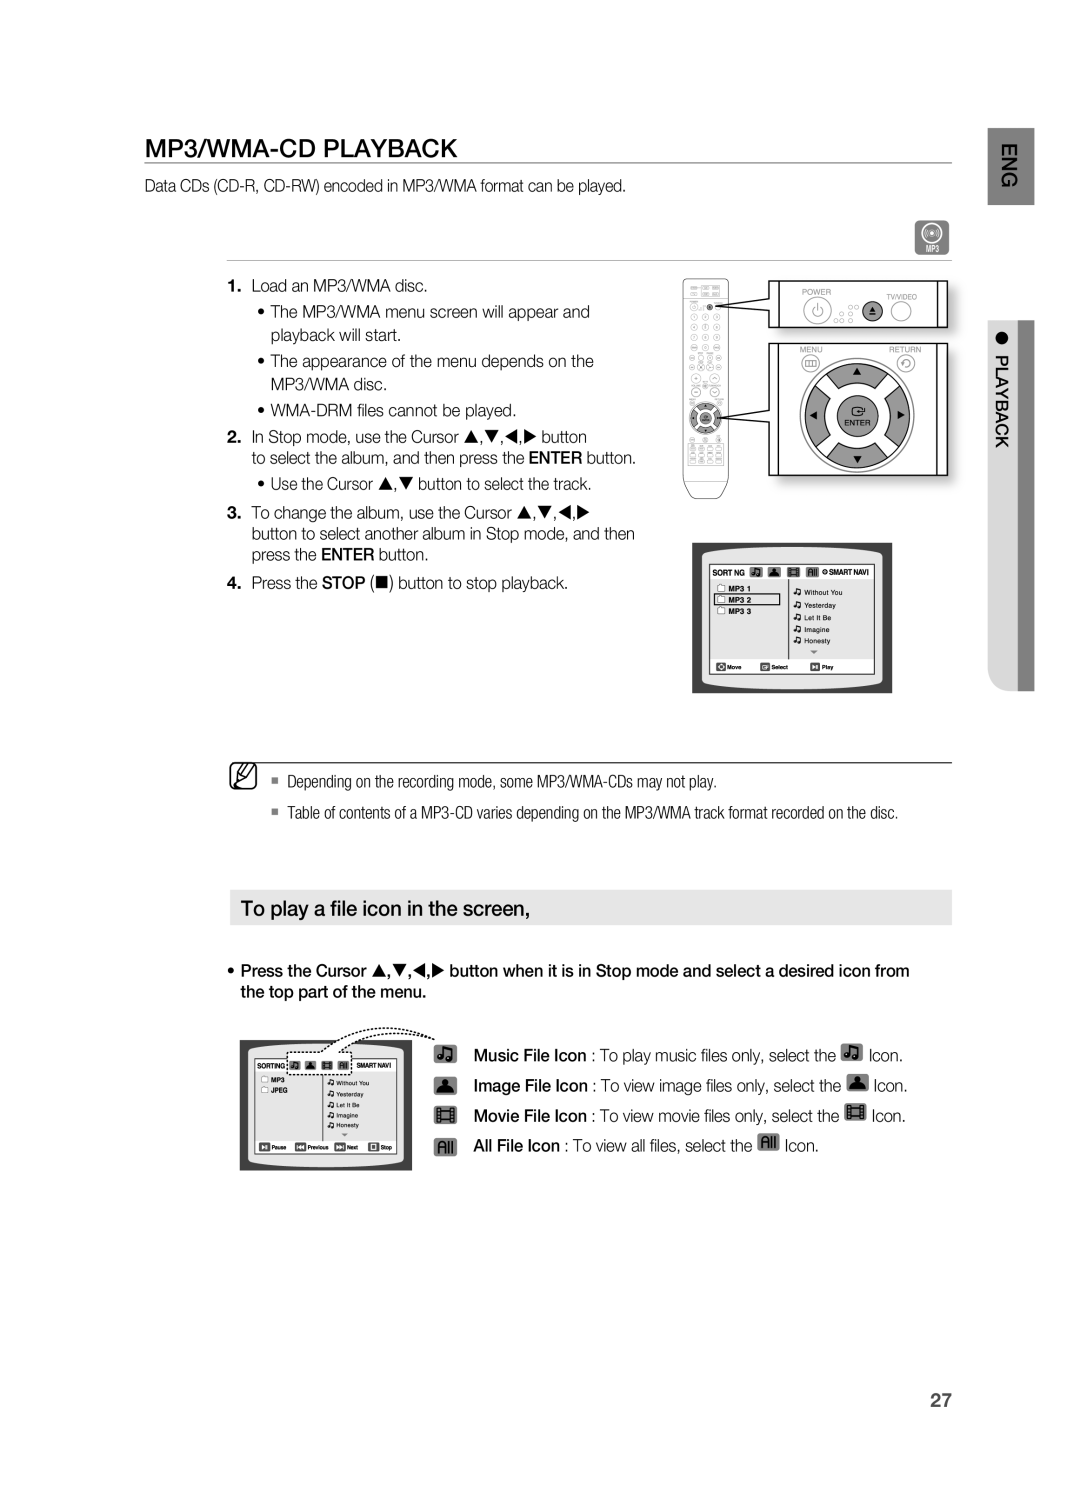 Sony HT-X810 user manual MP3/WMA-CD PlAYBACK, To play a file icon in the screen 